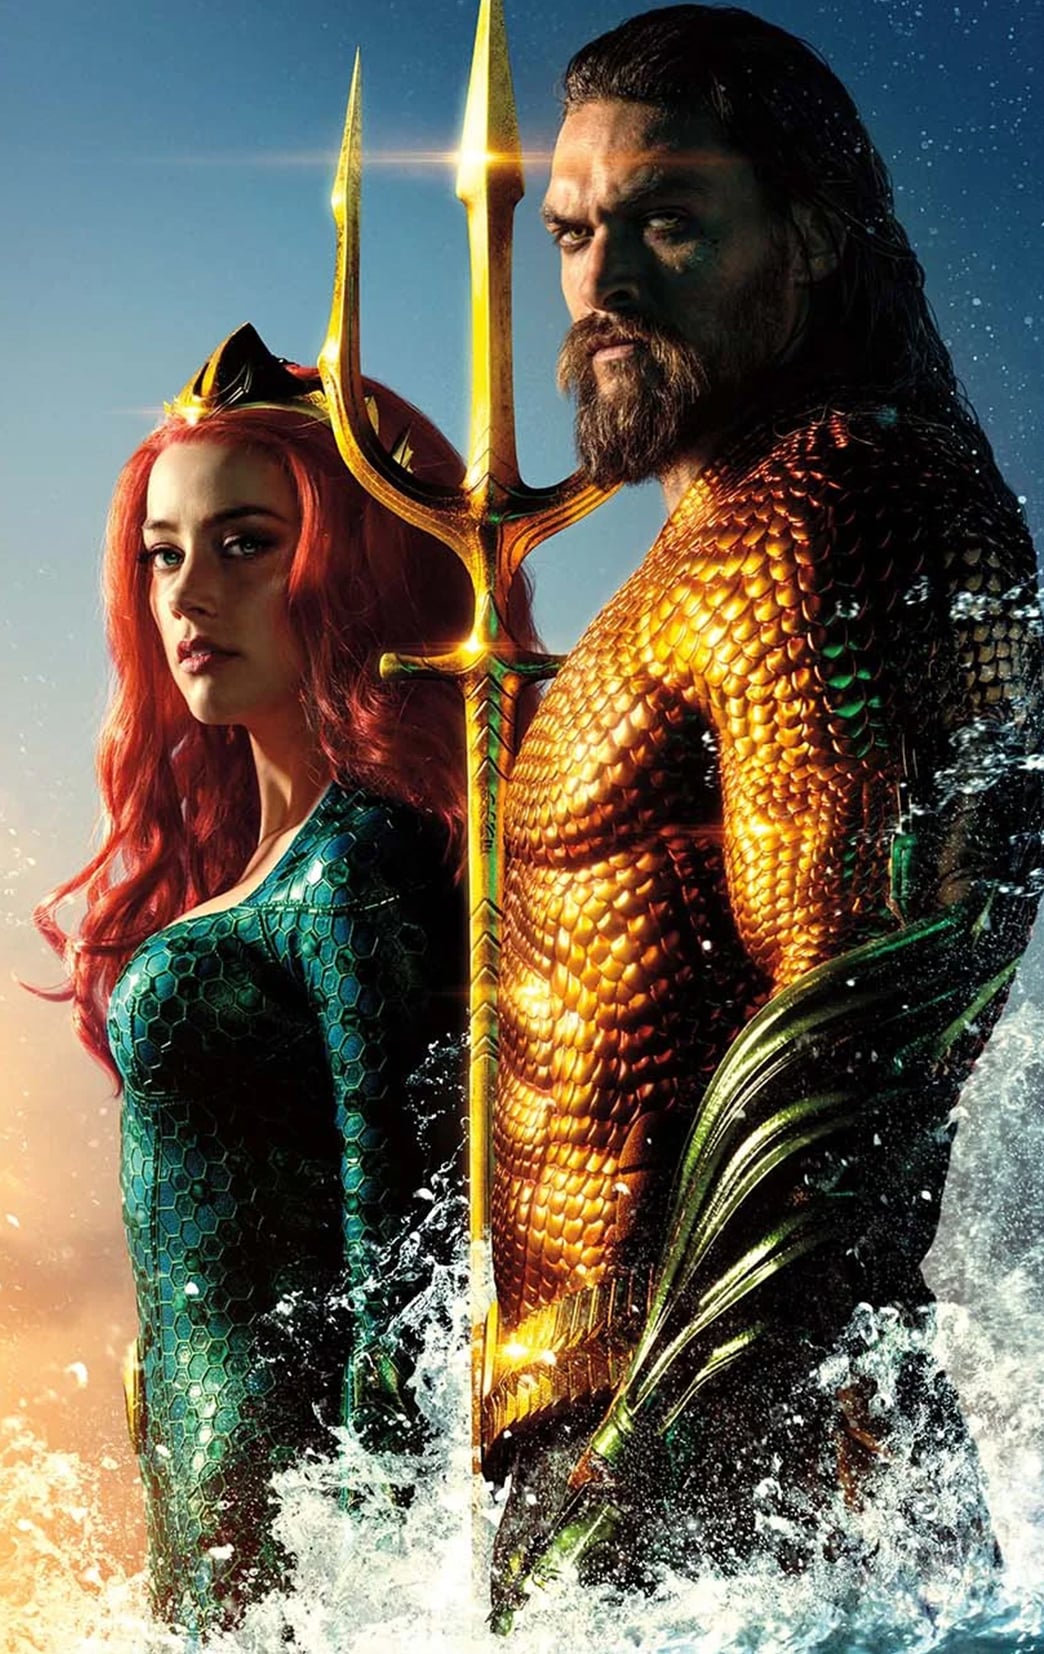 Aquaman movie poster with a man and woman in the water.